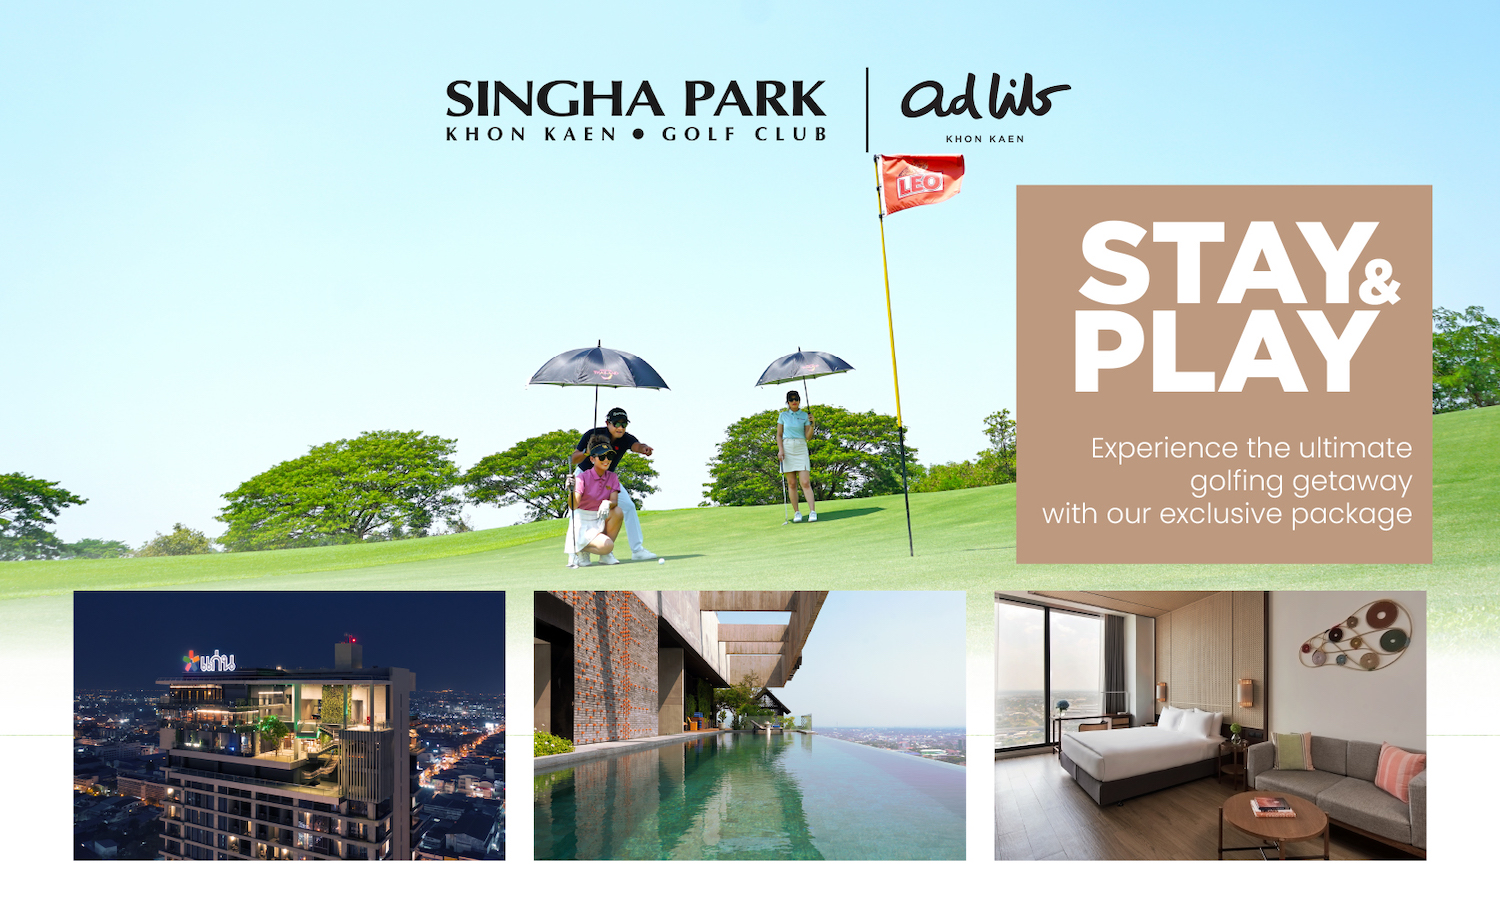 ‘Stay & Play’ – Golf package